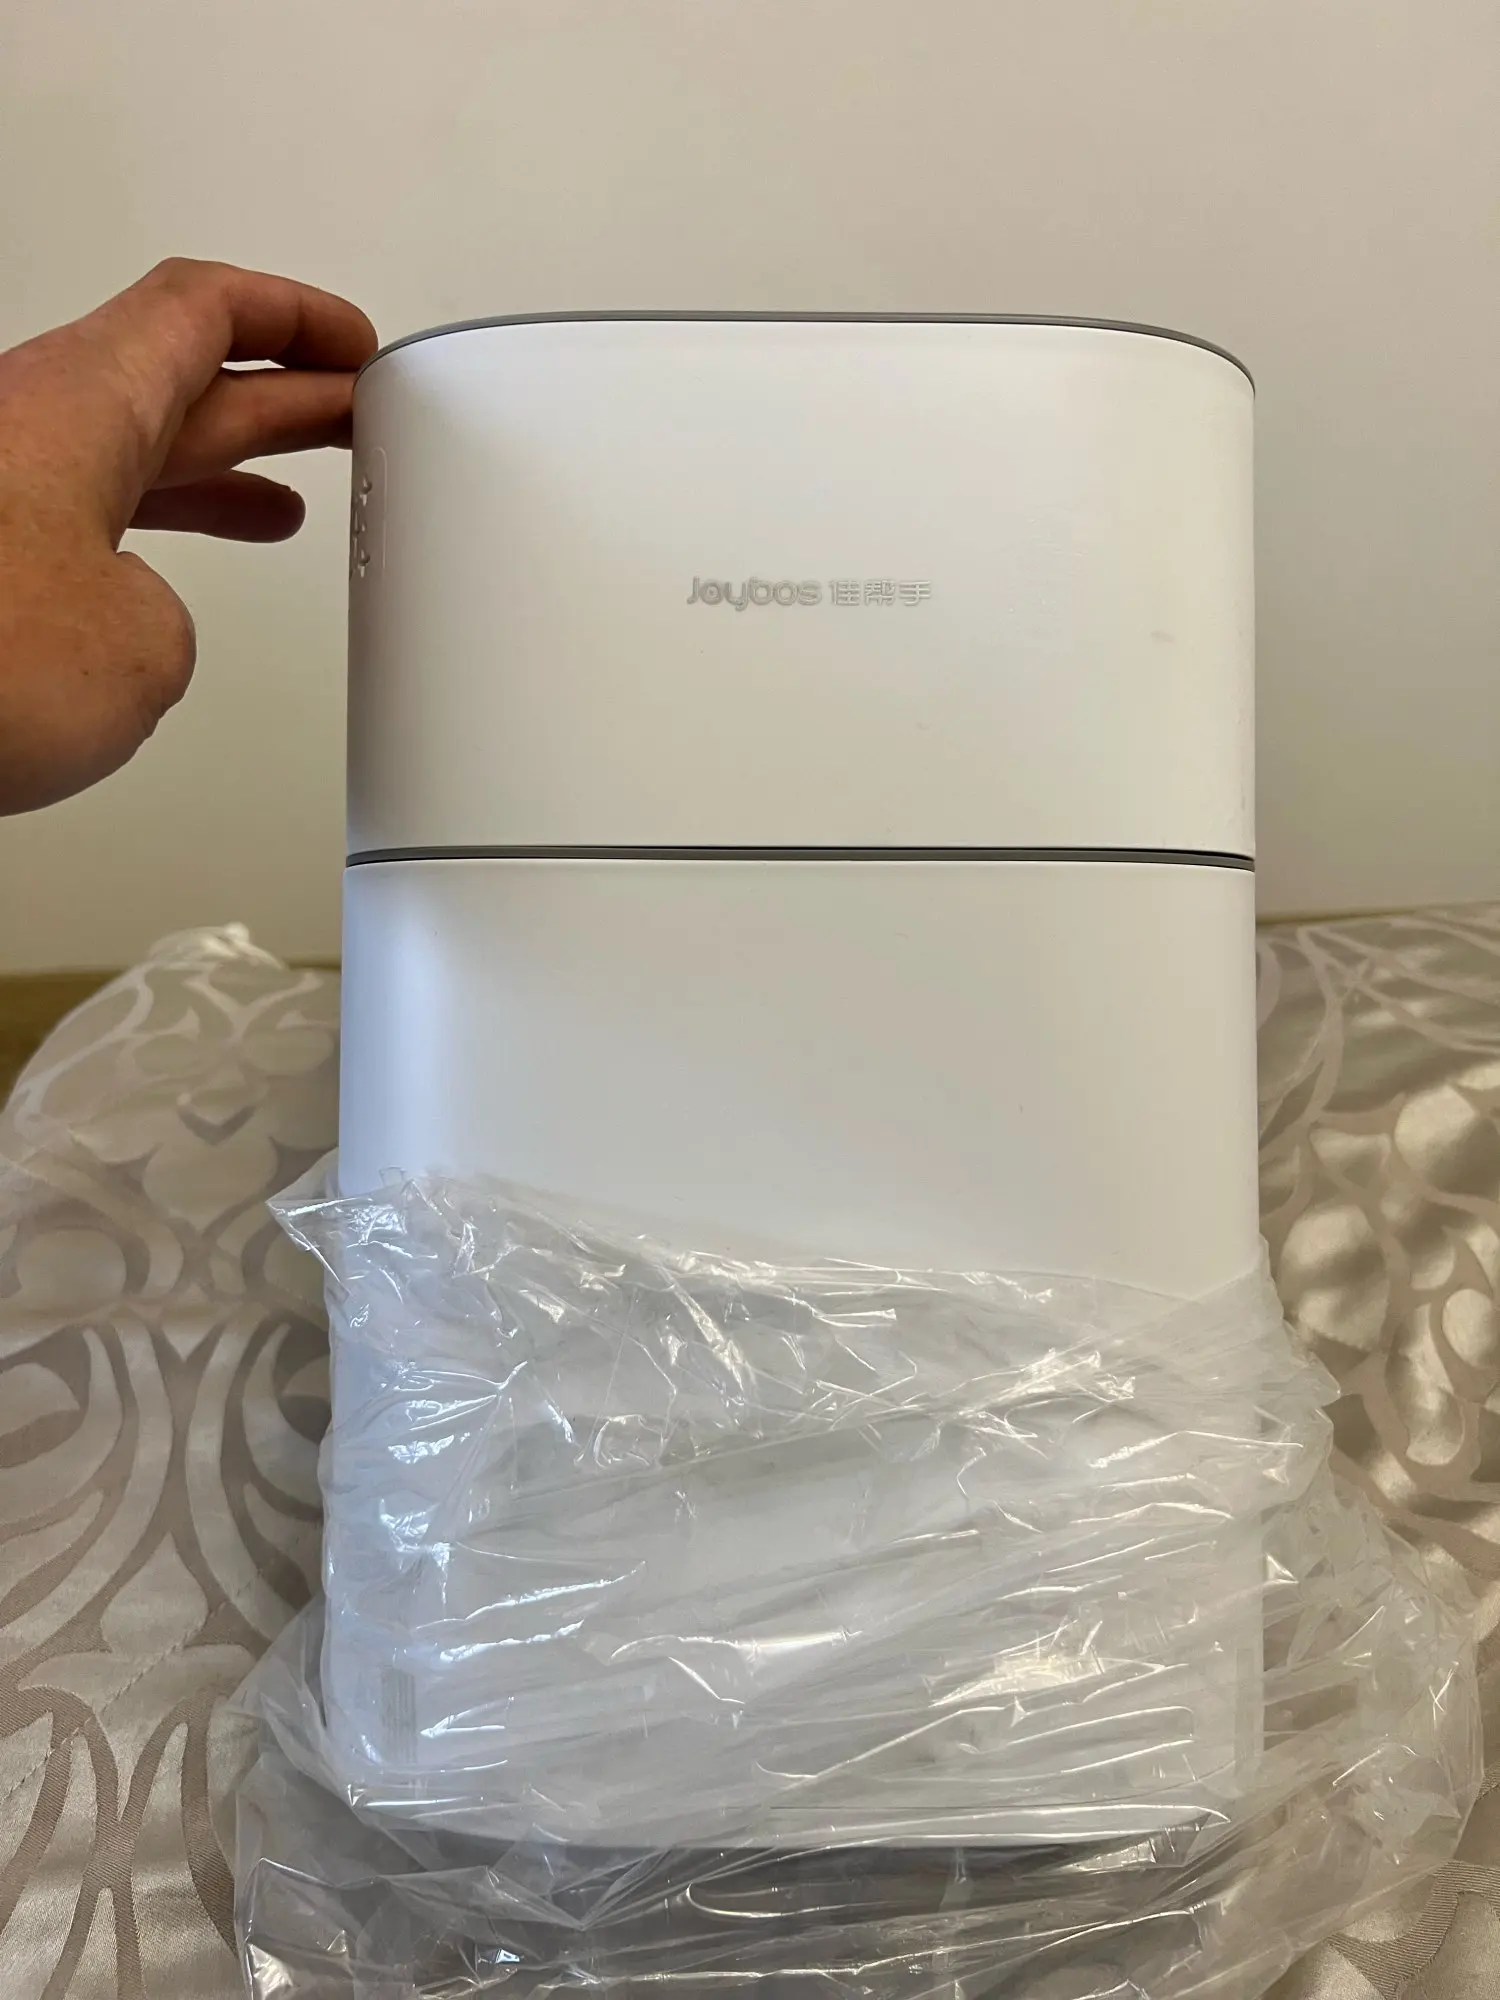 Bathroom Trash Can White 14L Smart Trash Can photo review